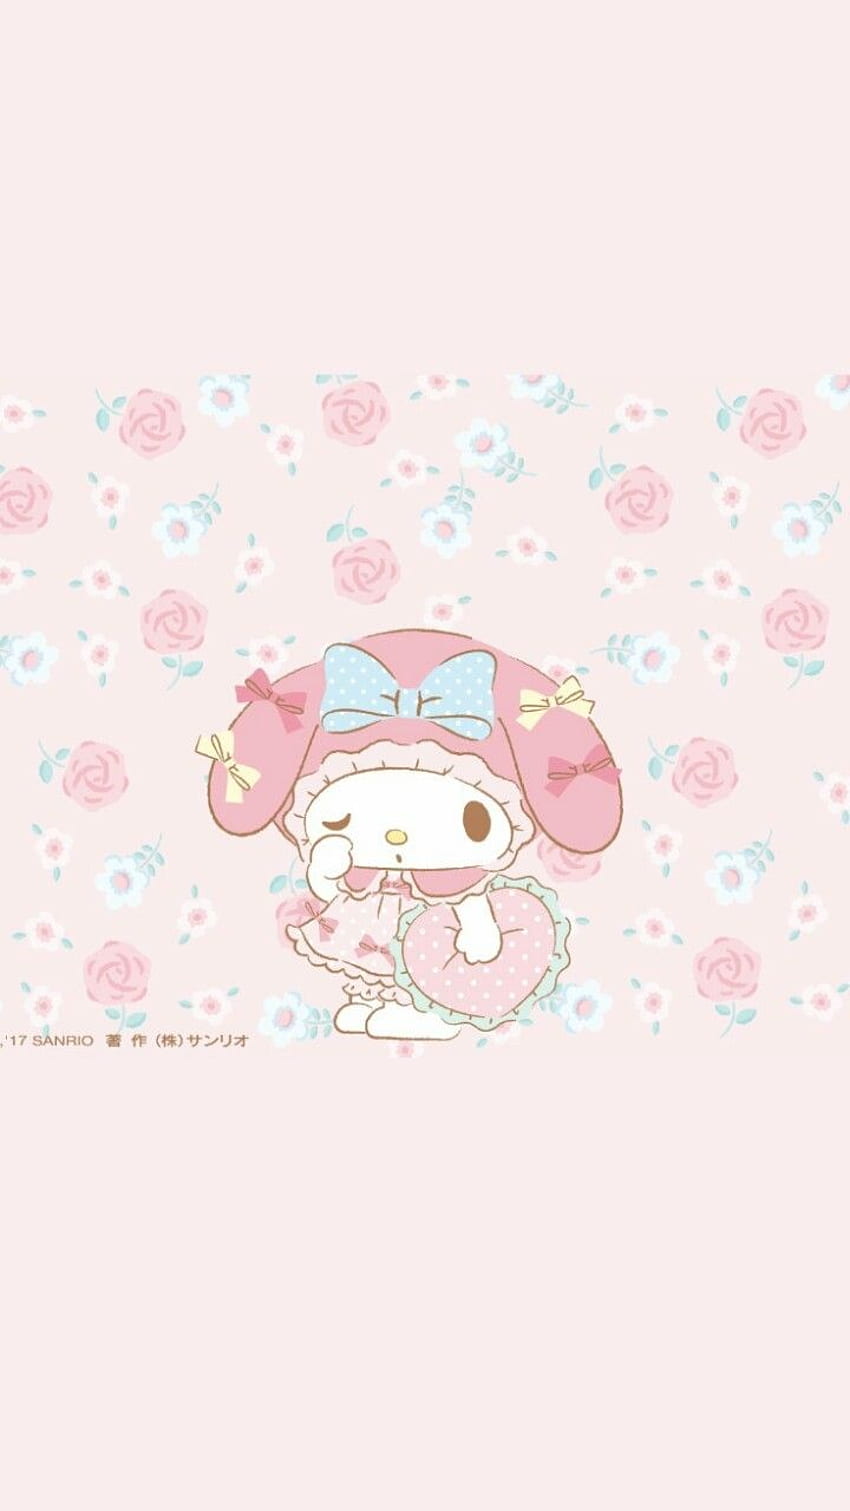 sanrio messages  rt pinned on Twitter my melody for kenmaluvrasf   from leviaei happy valentines day babe ilysm waaa sending u virtual  chocolates and candies  httpstco0fjb3xJflF  Twitter